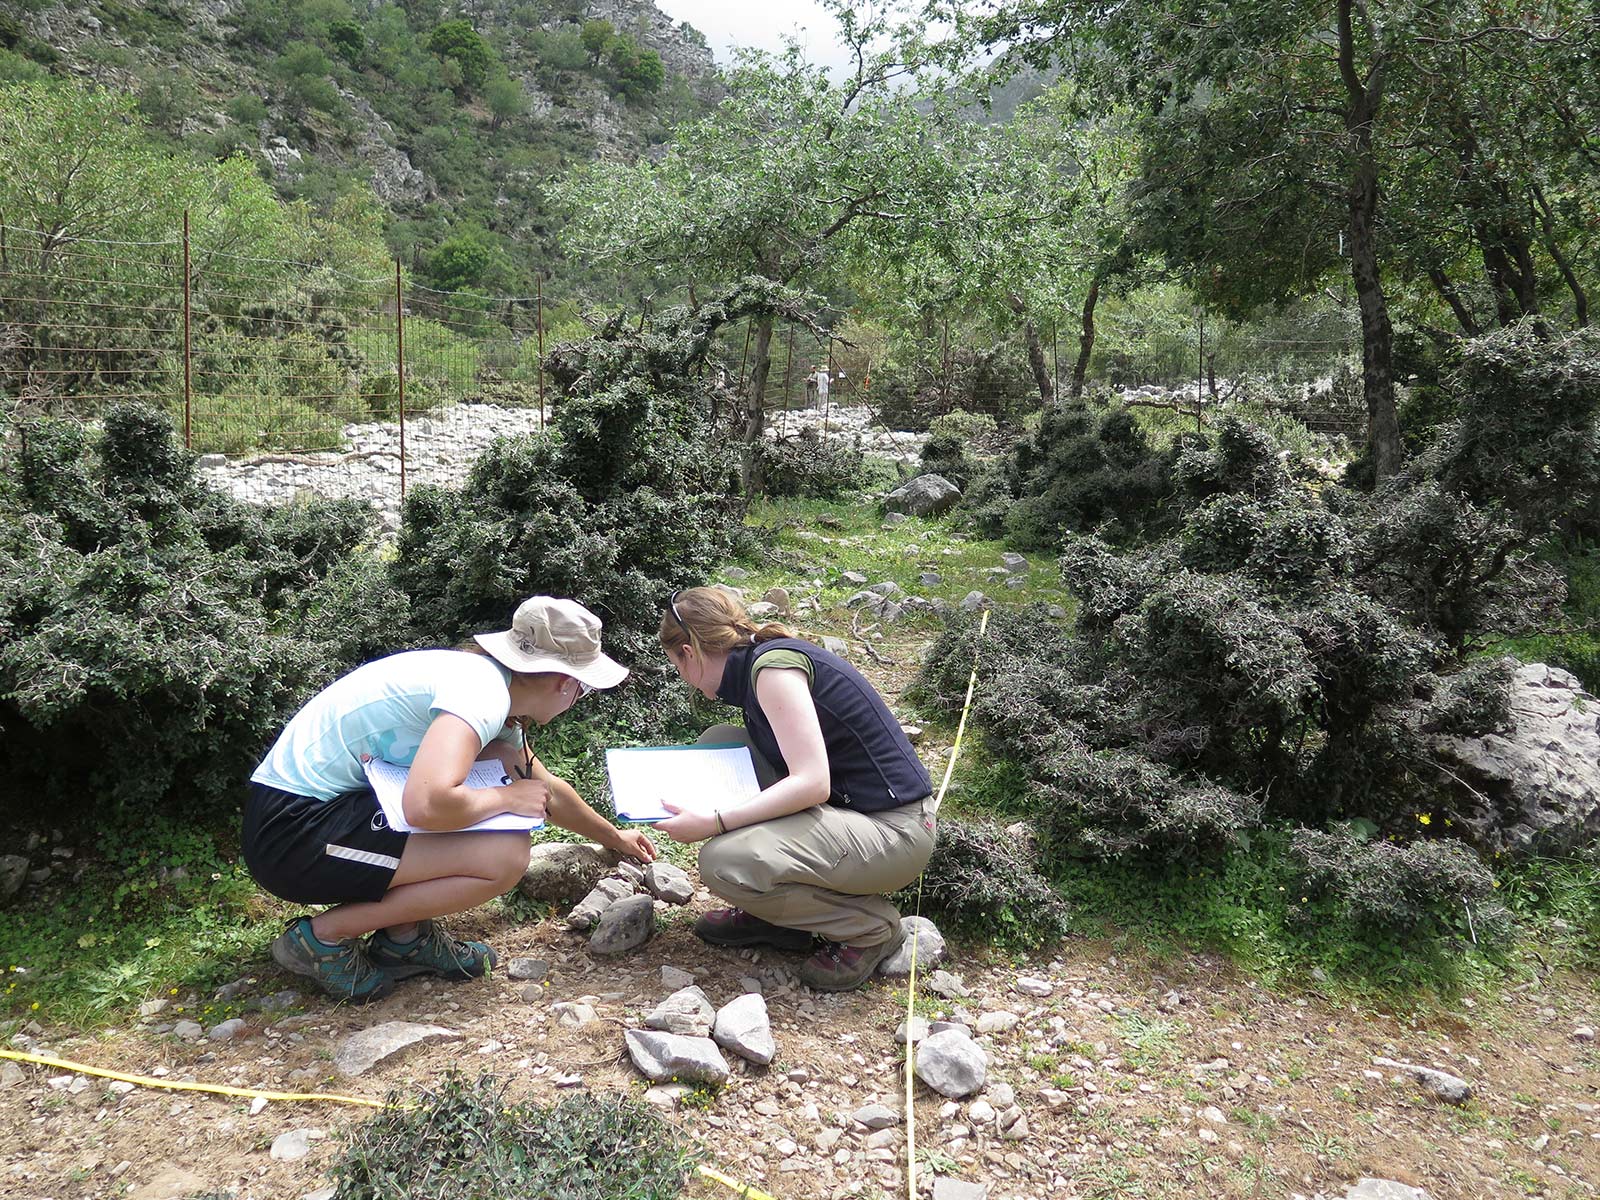 Collaborators of the Zelkova Project determining plants within the fenced plots